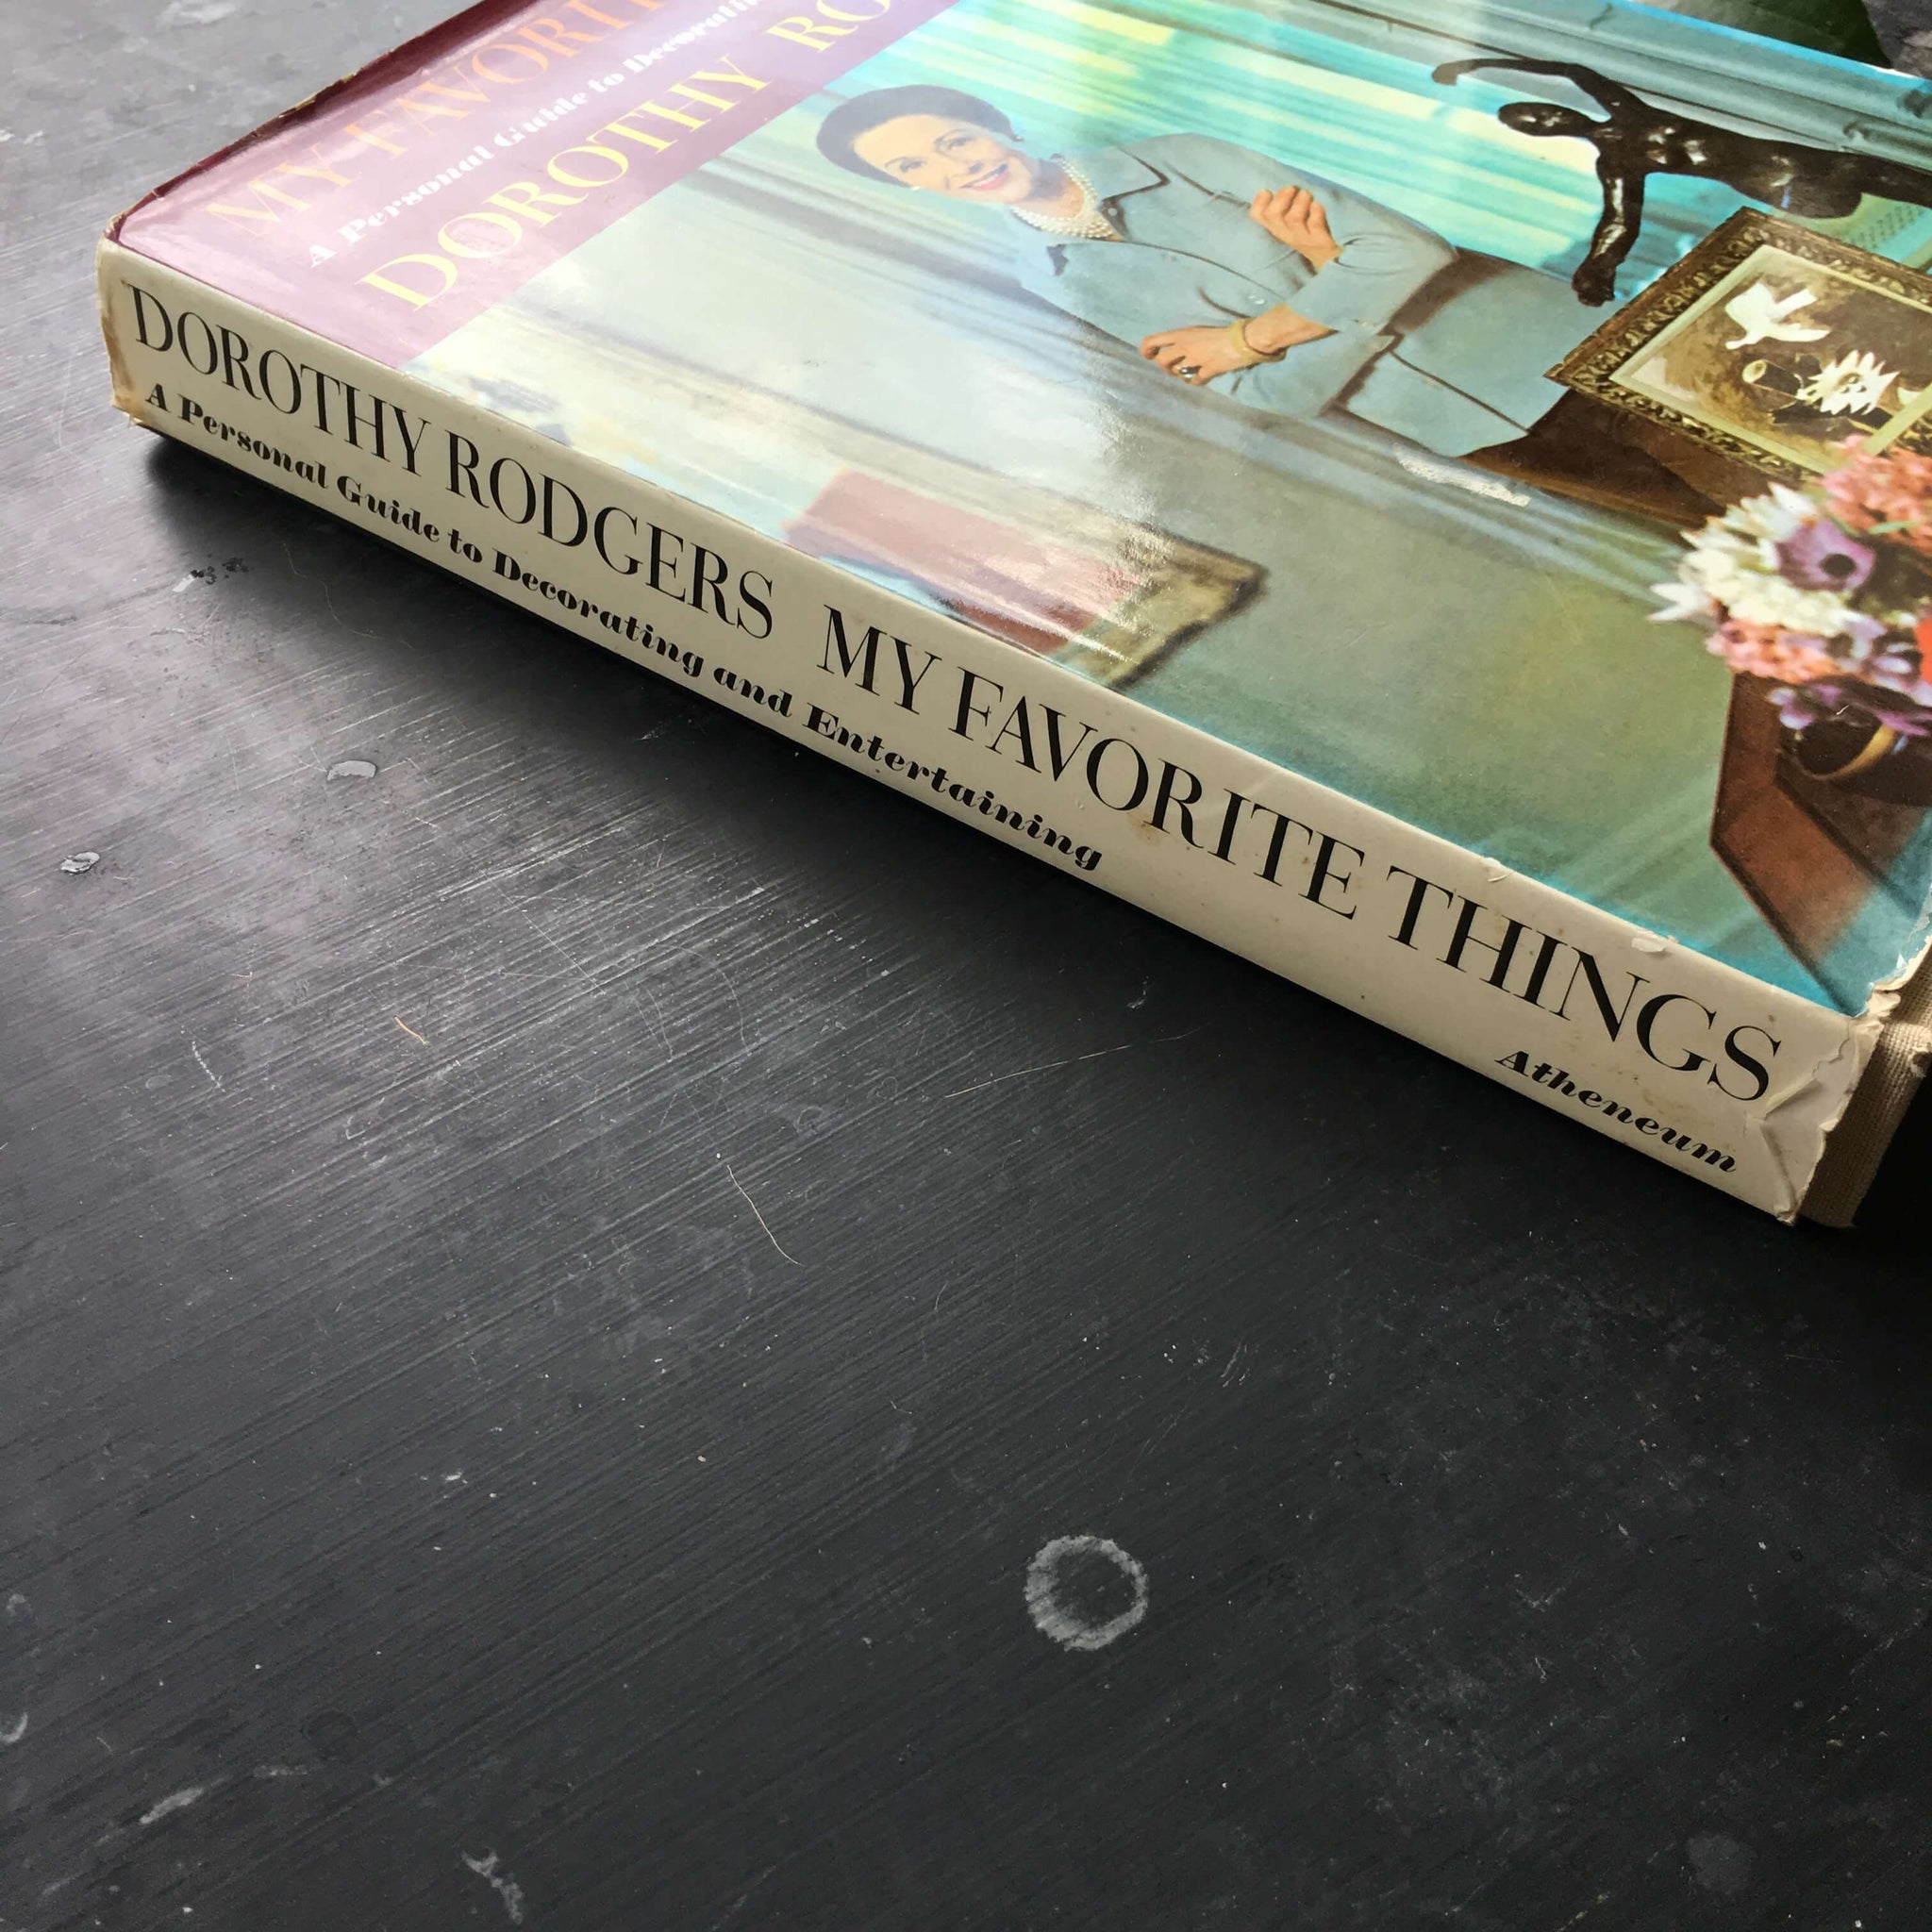 My Favorite Things - Dorothy Rodgers Design Book - 1967 Edition, 5th Printing - Midcentury Decorating Book with Recipes